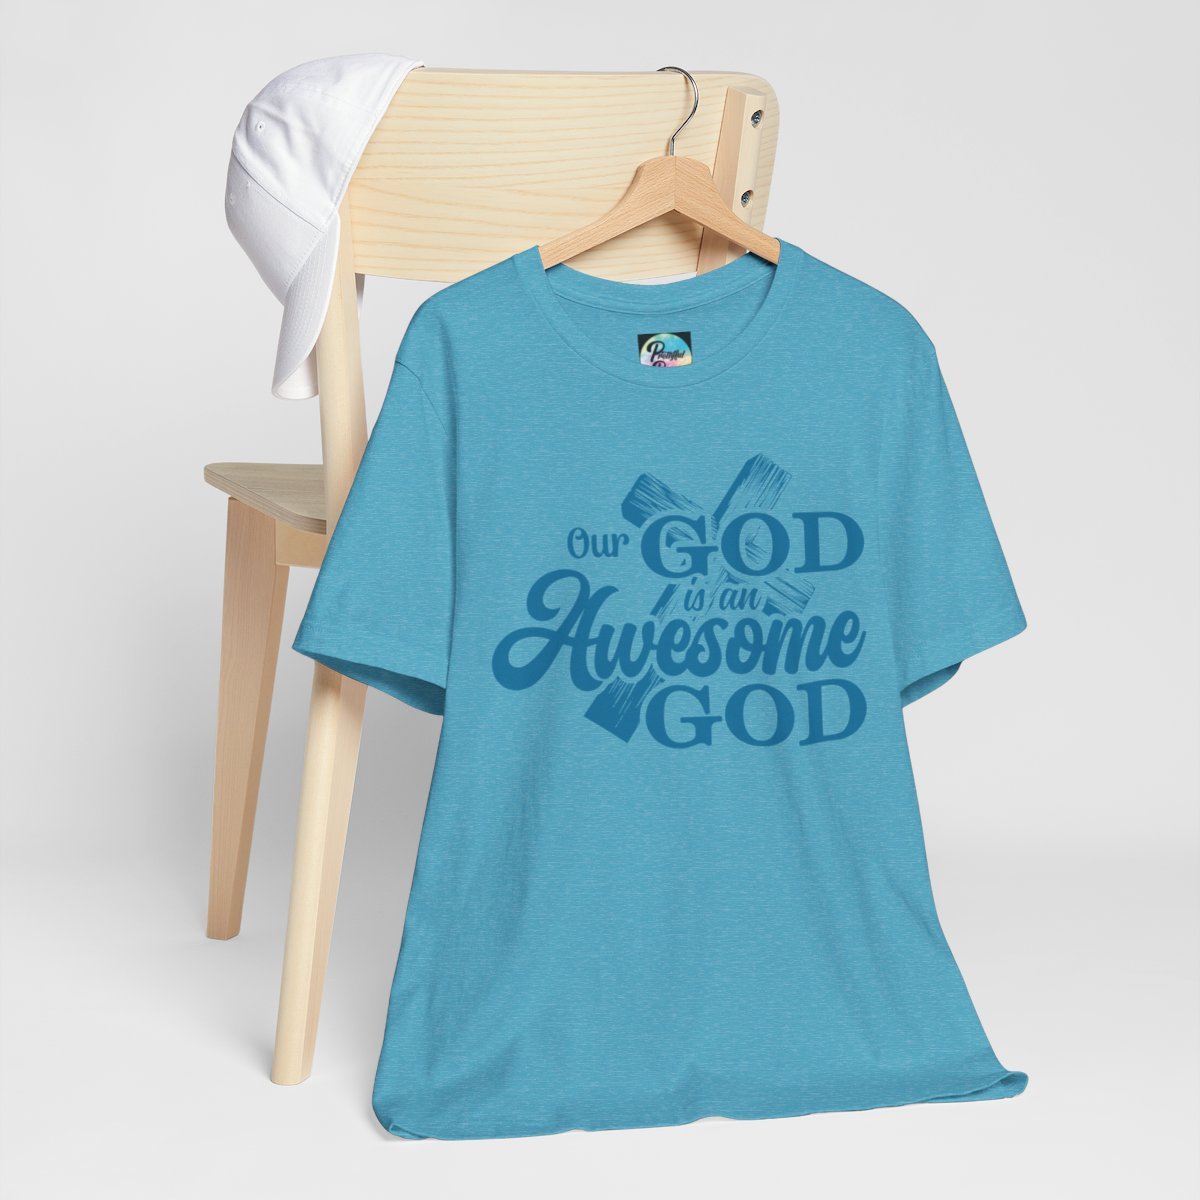 Our God is an Awesome God UNISEX Christian T-Shirt - 9 Colors - Heather - Gospel - Christianity - Bible